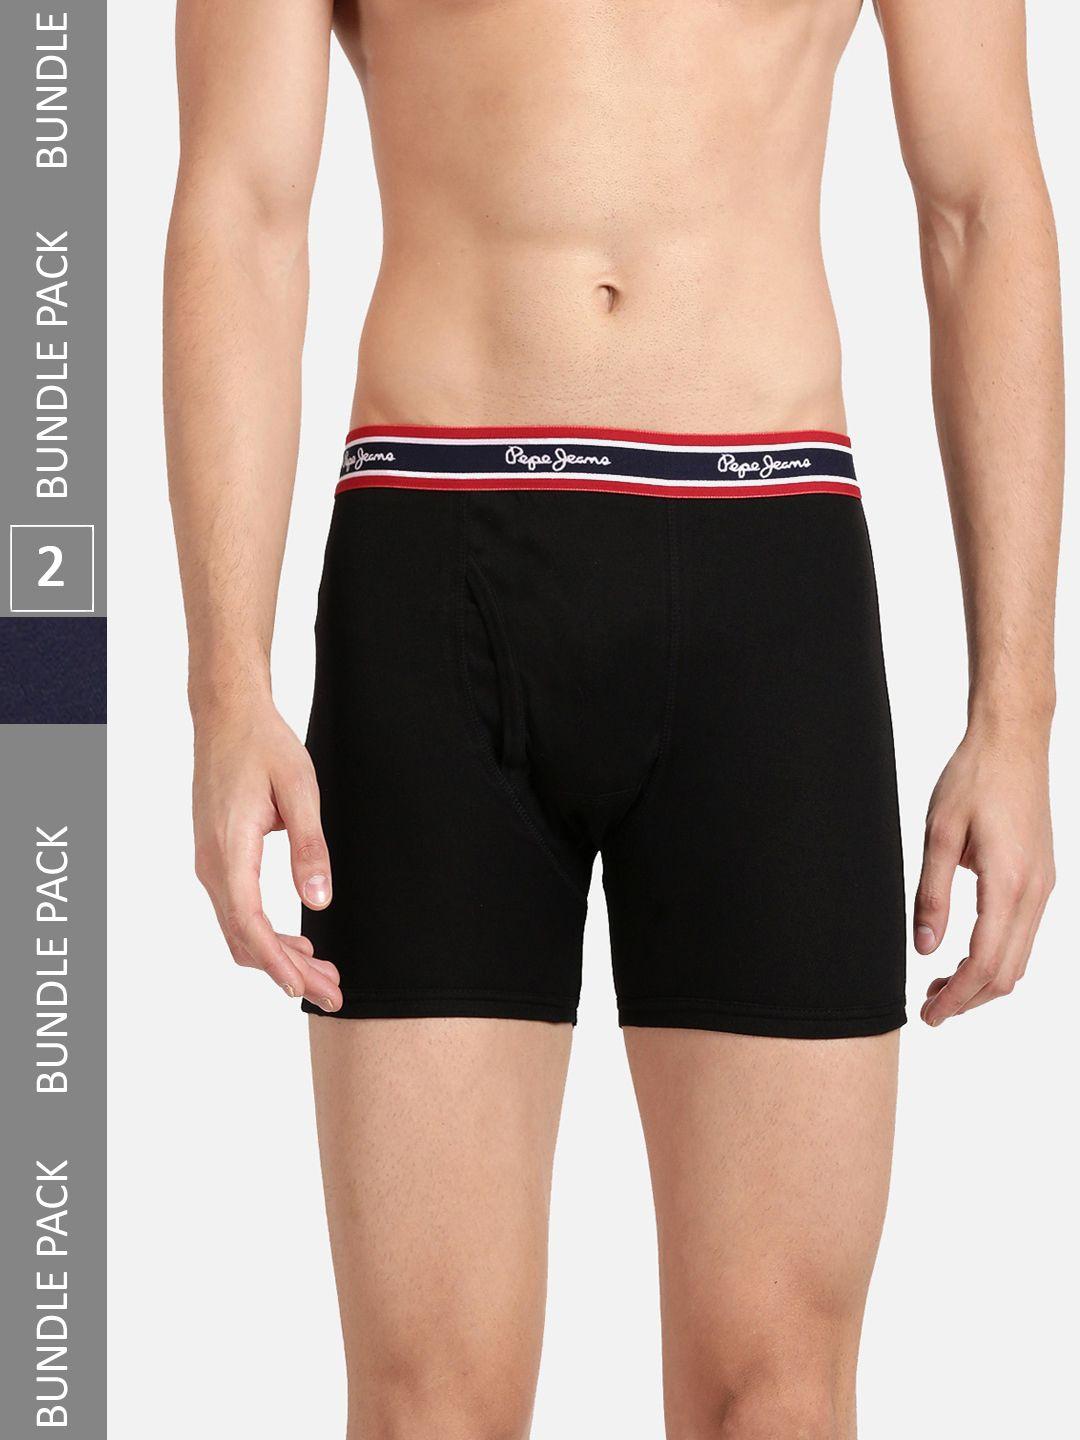 Pepe Jeans Men Pack Of 2 Mid-Rise Cotton Trunks